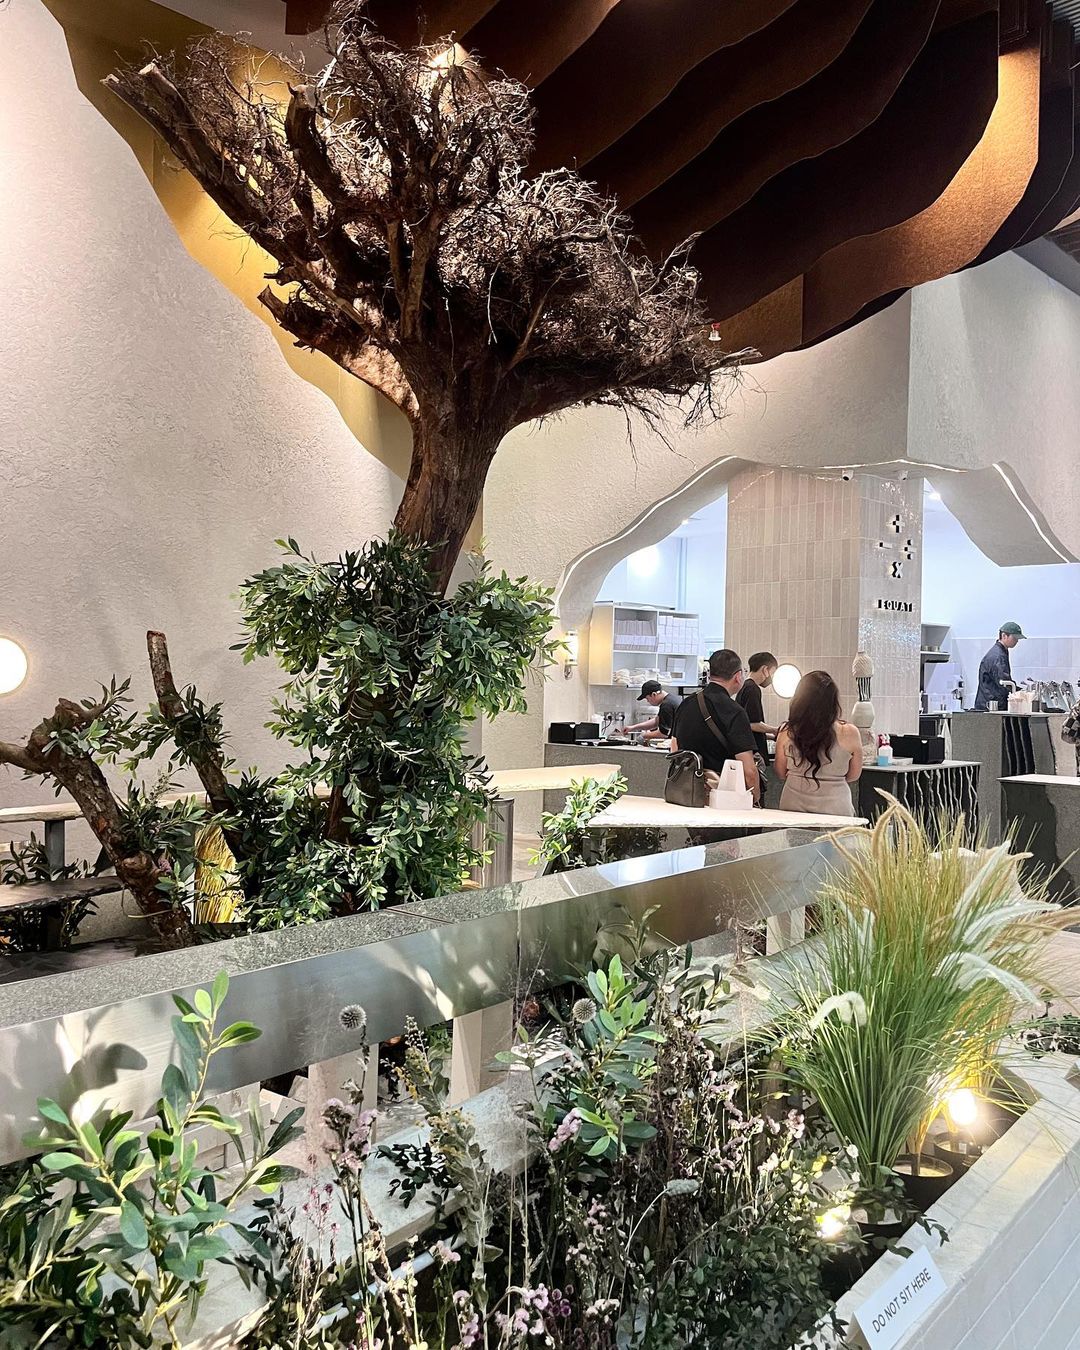 New cafes and restaurants January 2023 - equate coffee upside-down tree